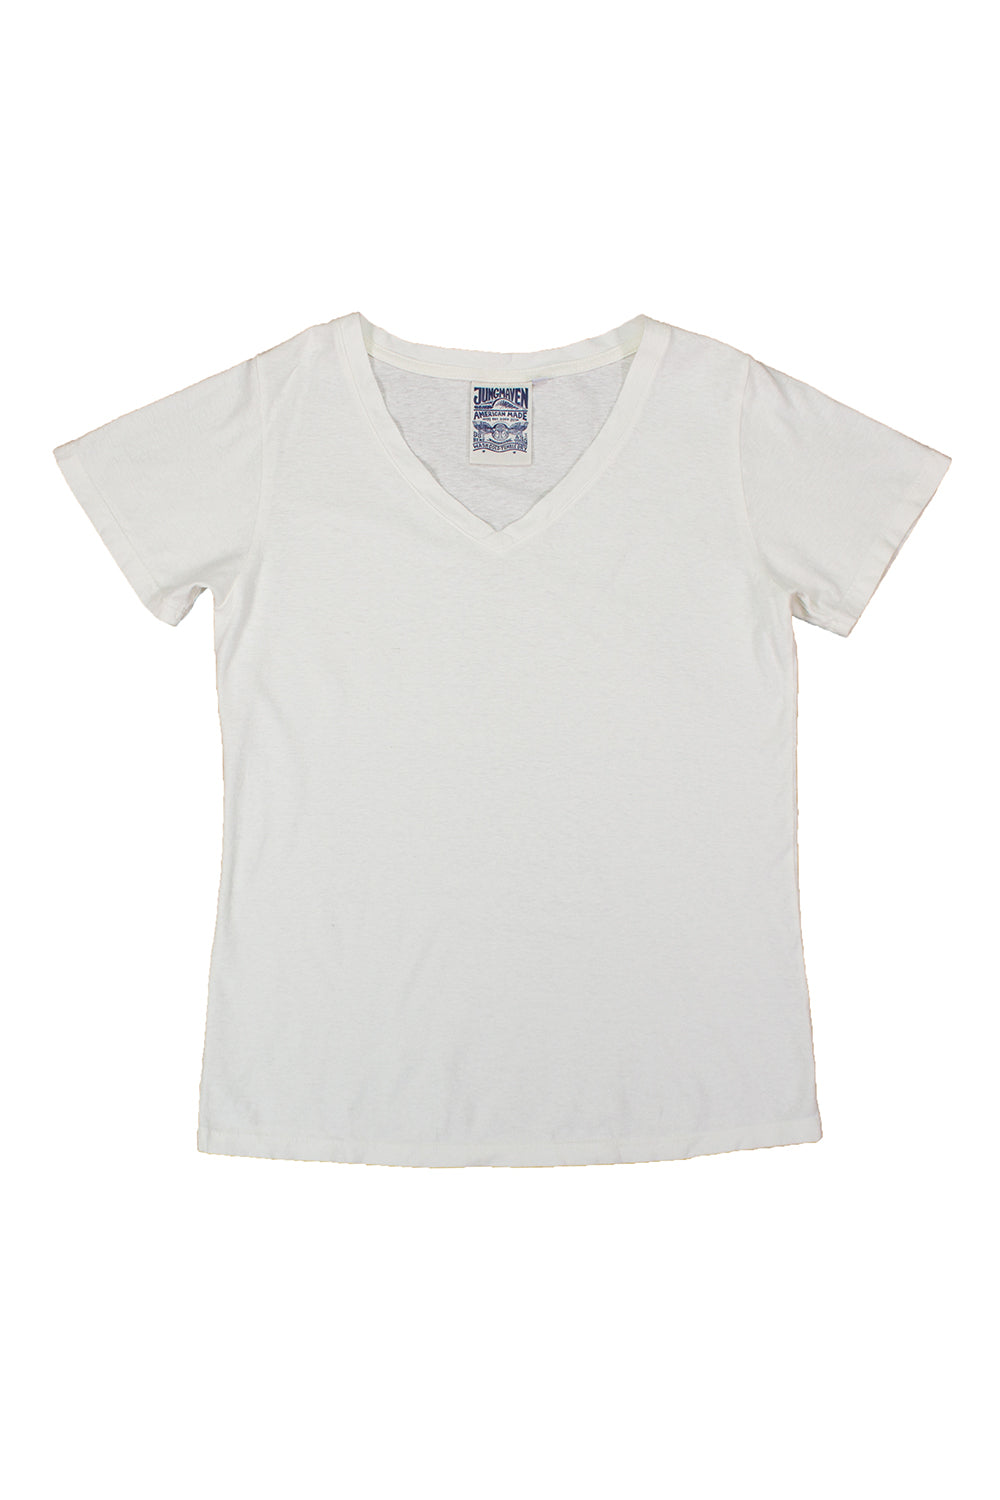 Paige V-neck | Jungmaven Hemp Clothing & Accessories / Color: Washed White